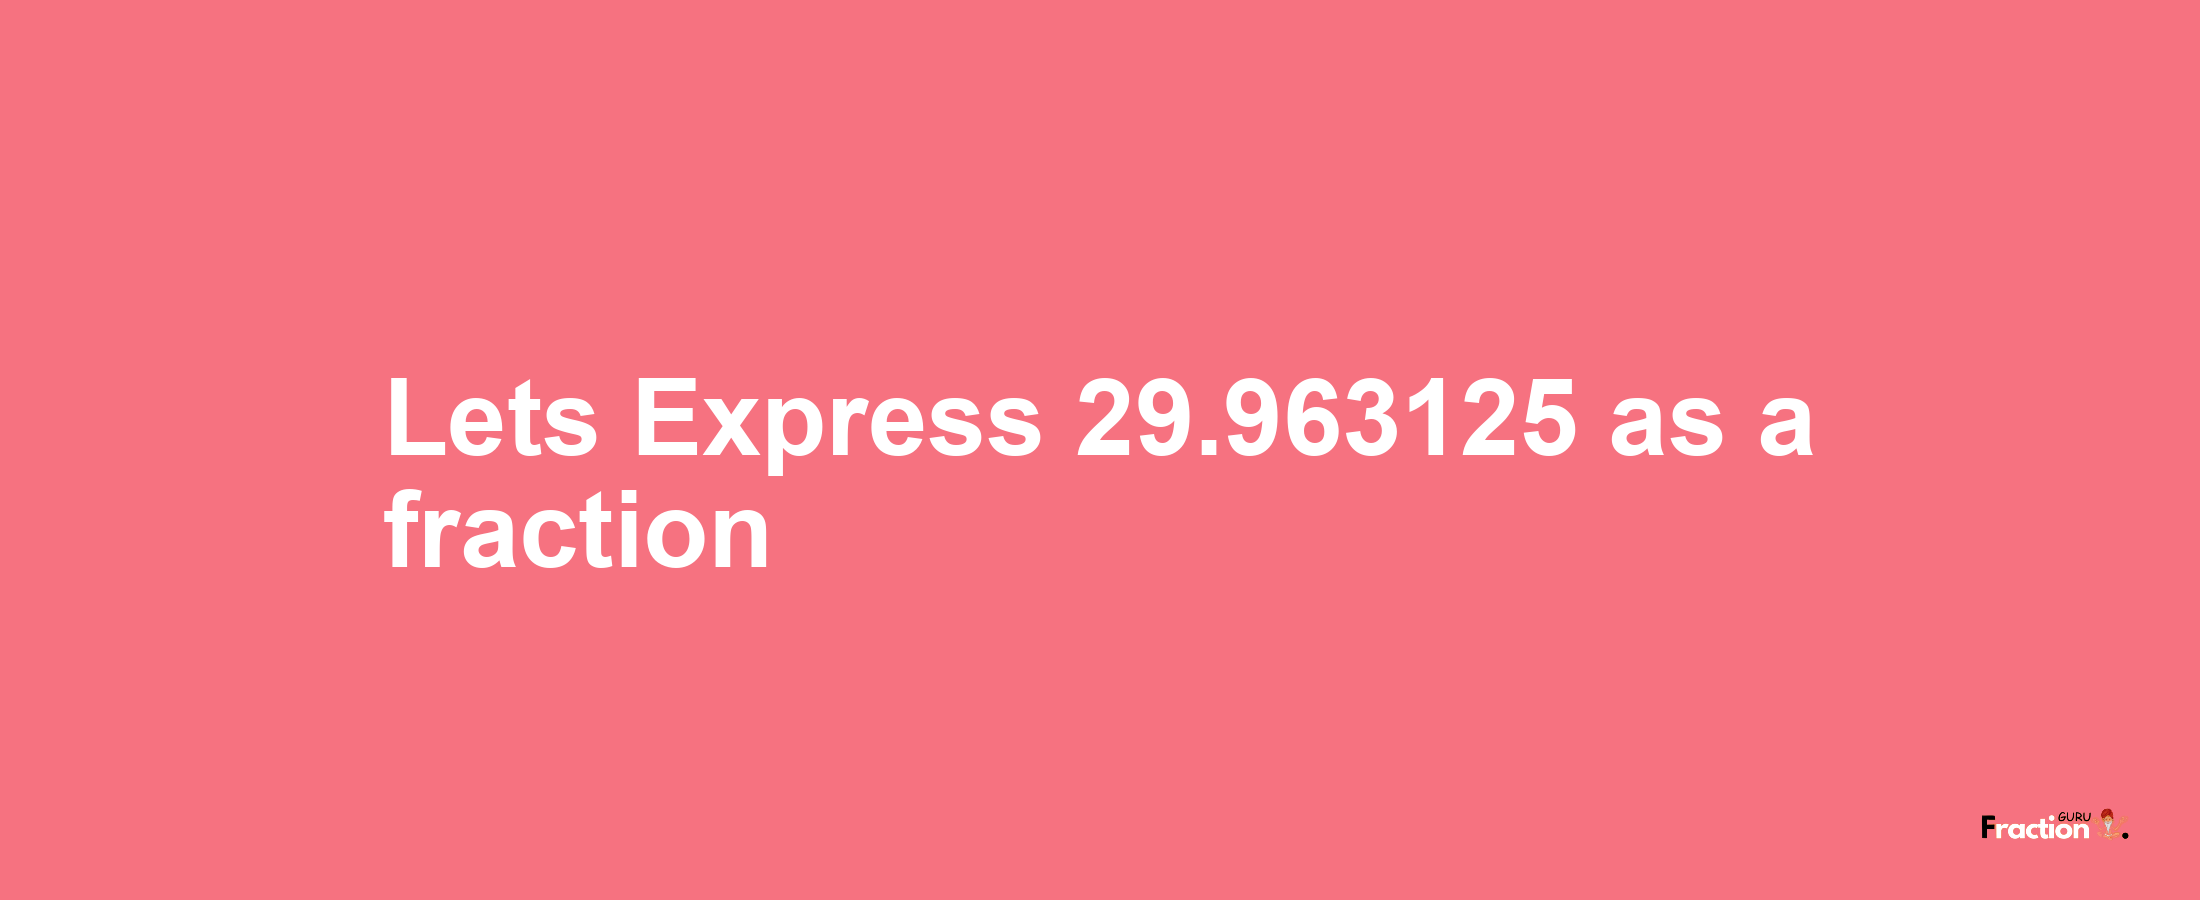 Lets Express 29.963125 as afraction